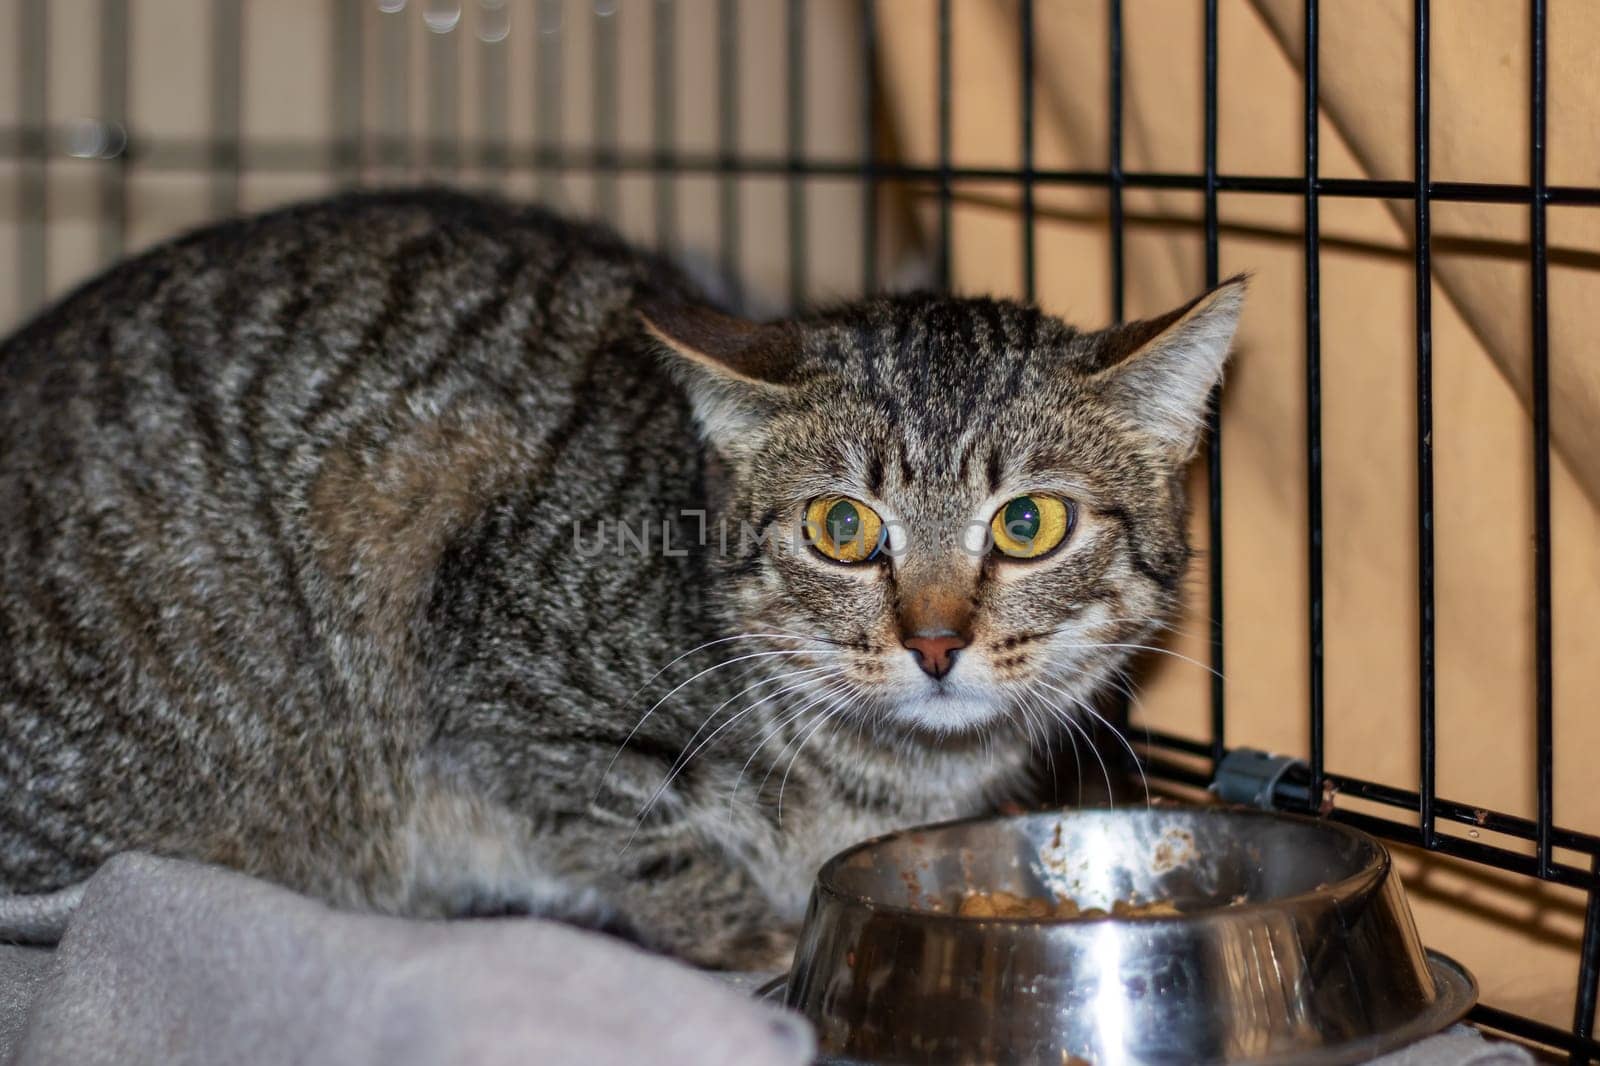 A Felidae, carnivorous, small to mediumsized cat with whiskers and snout is eating food from a bowl in a cage. This terrestrial animal with fur is usually found in the wild